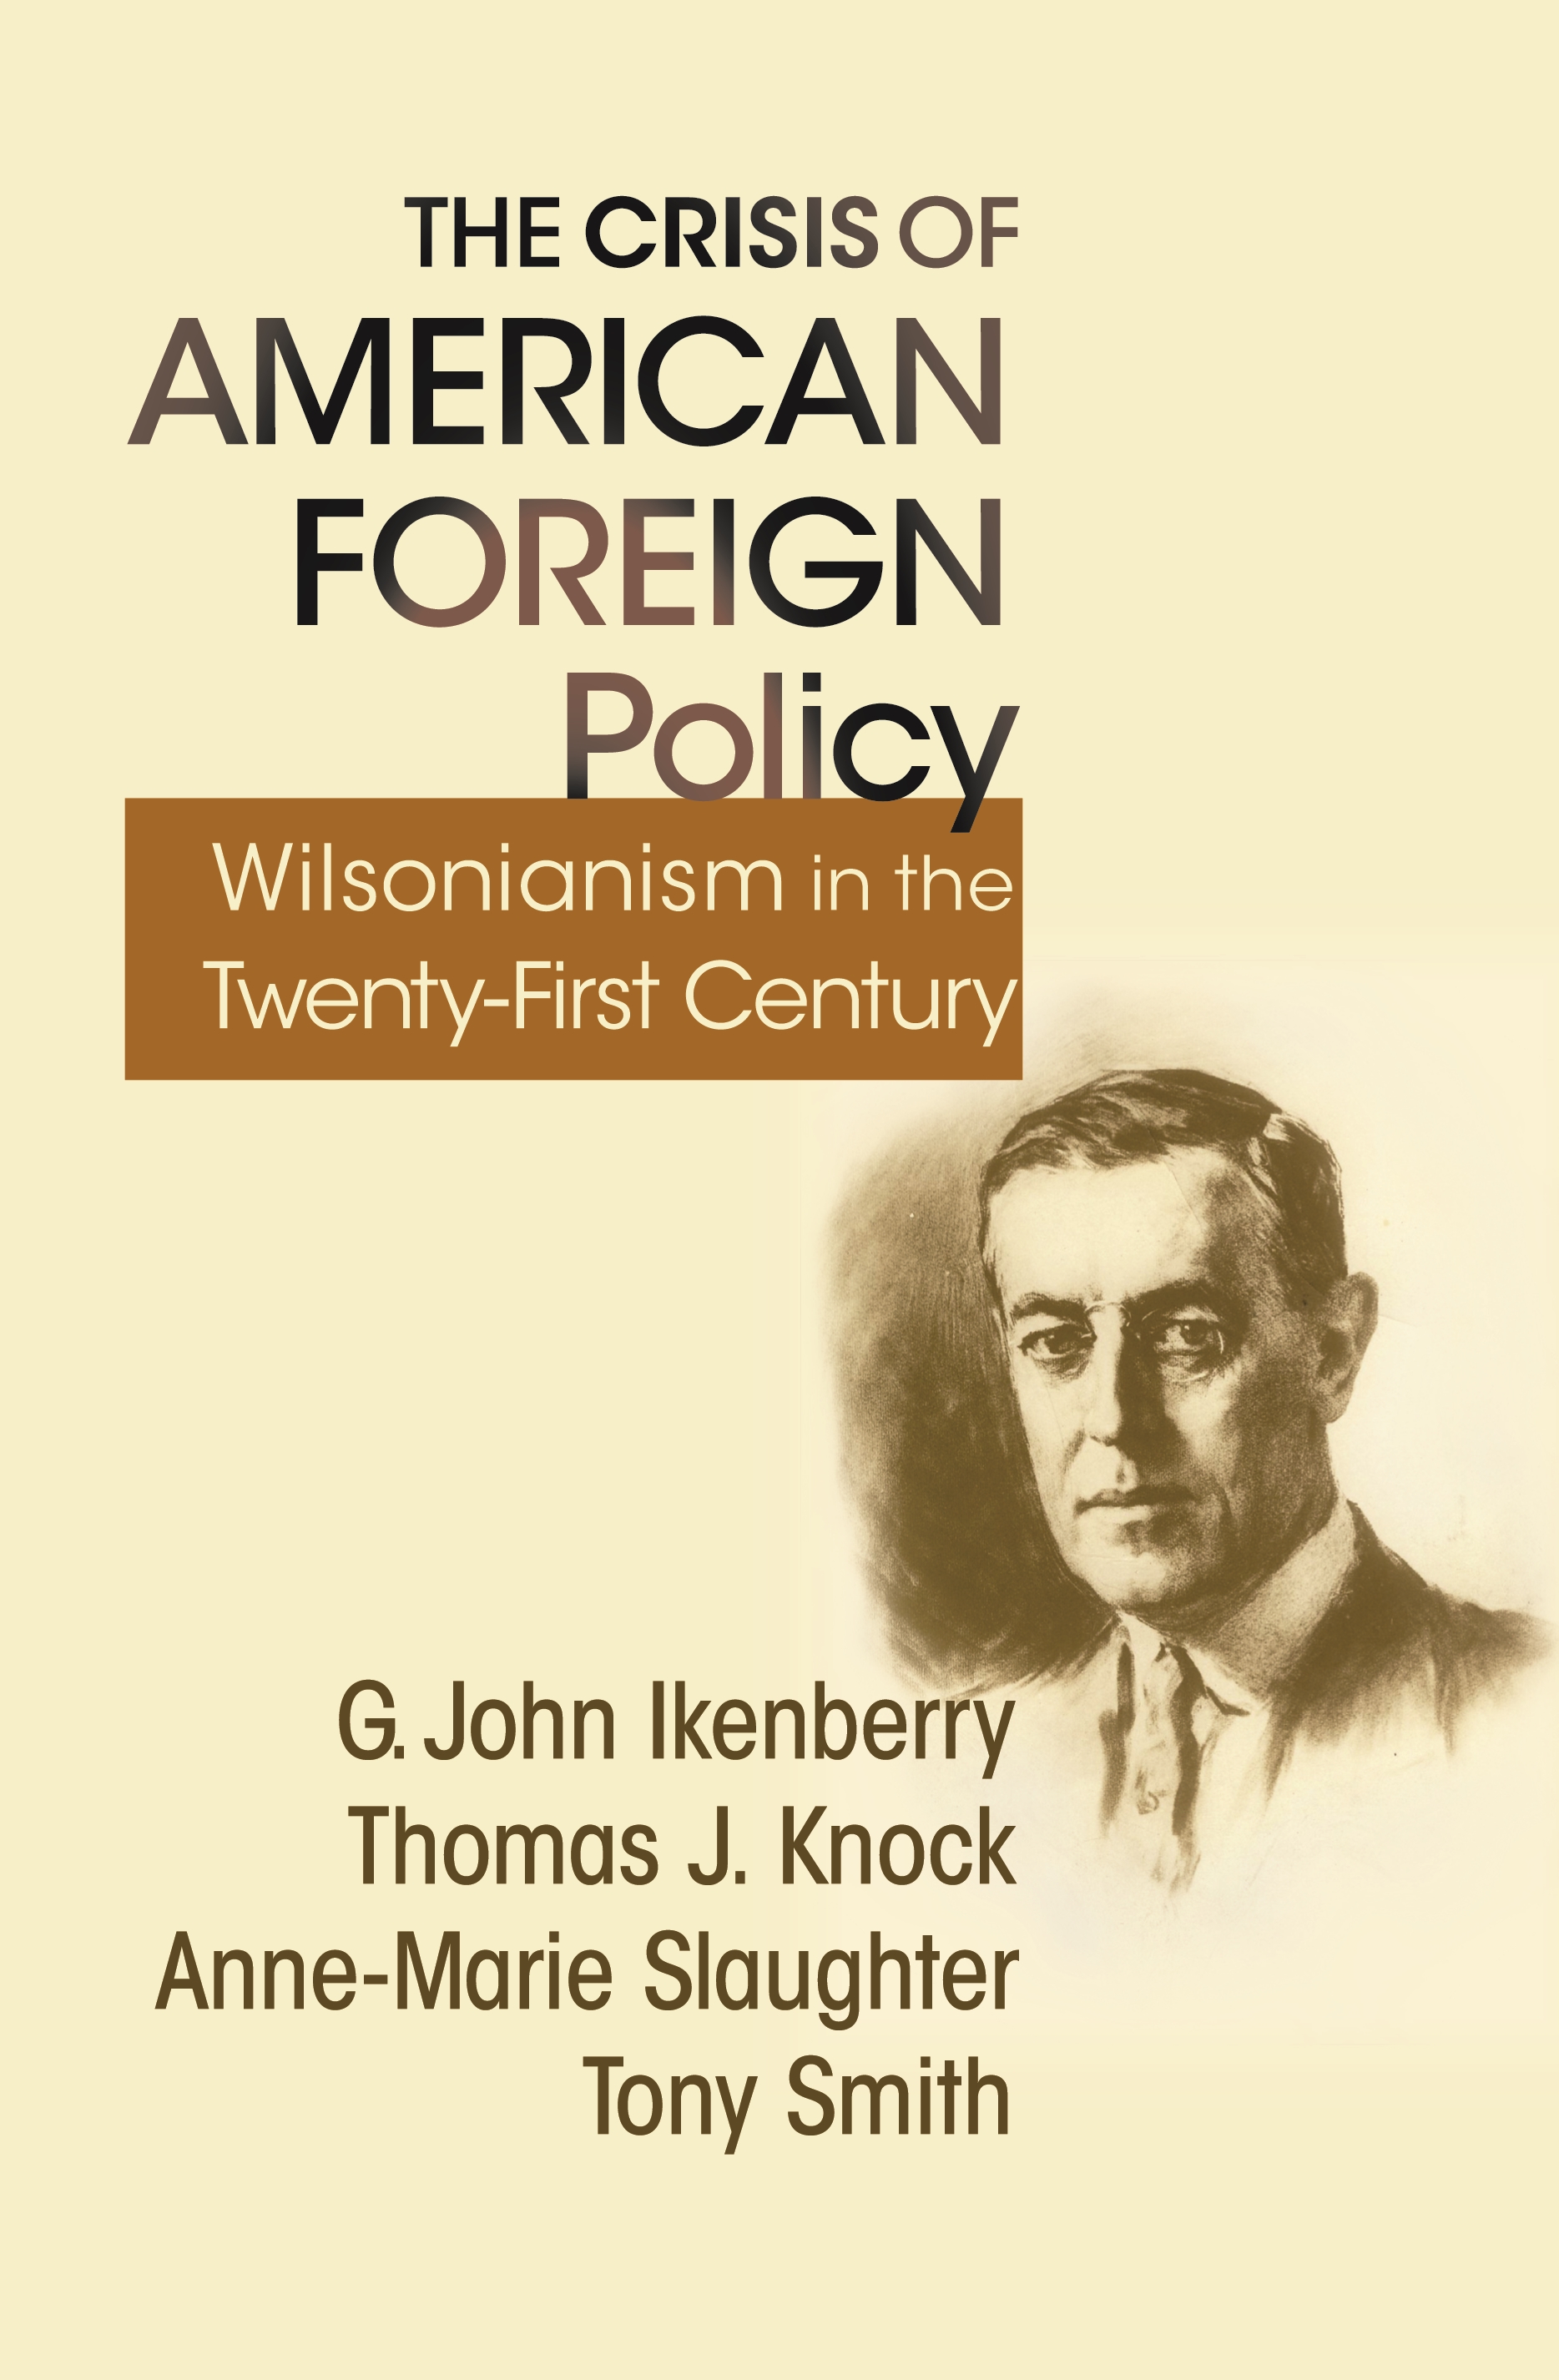 The Crisis of American Foreign Policy - 15-24.99